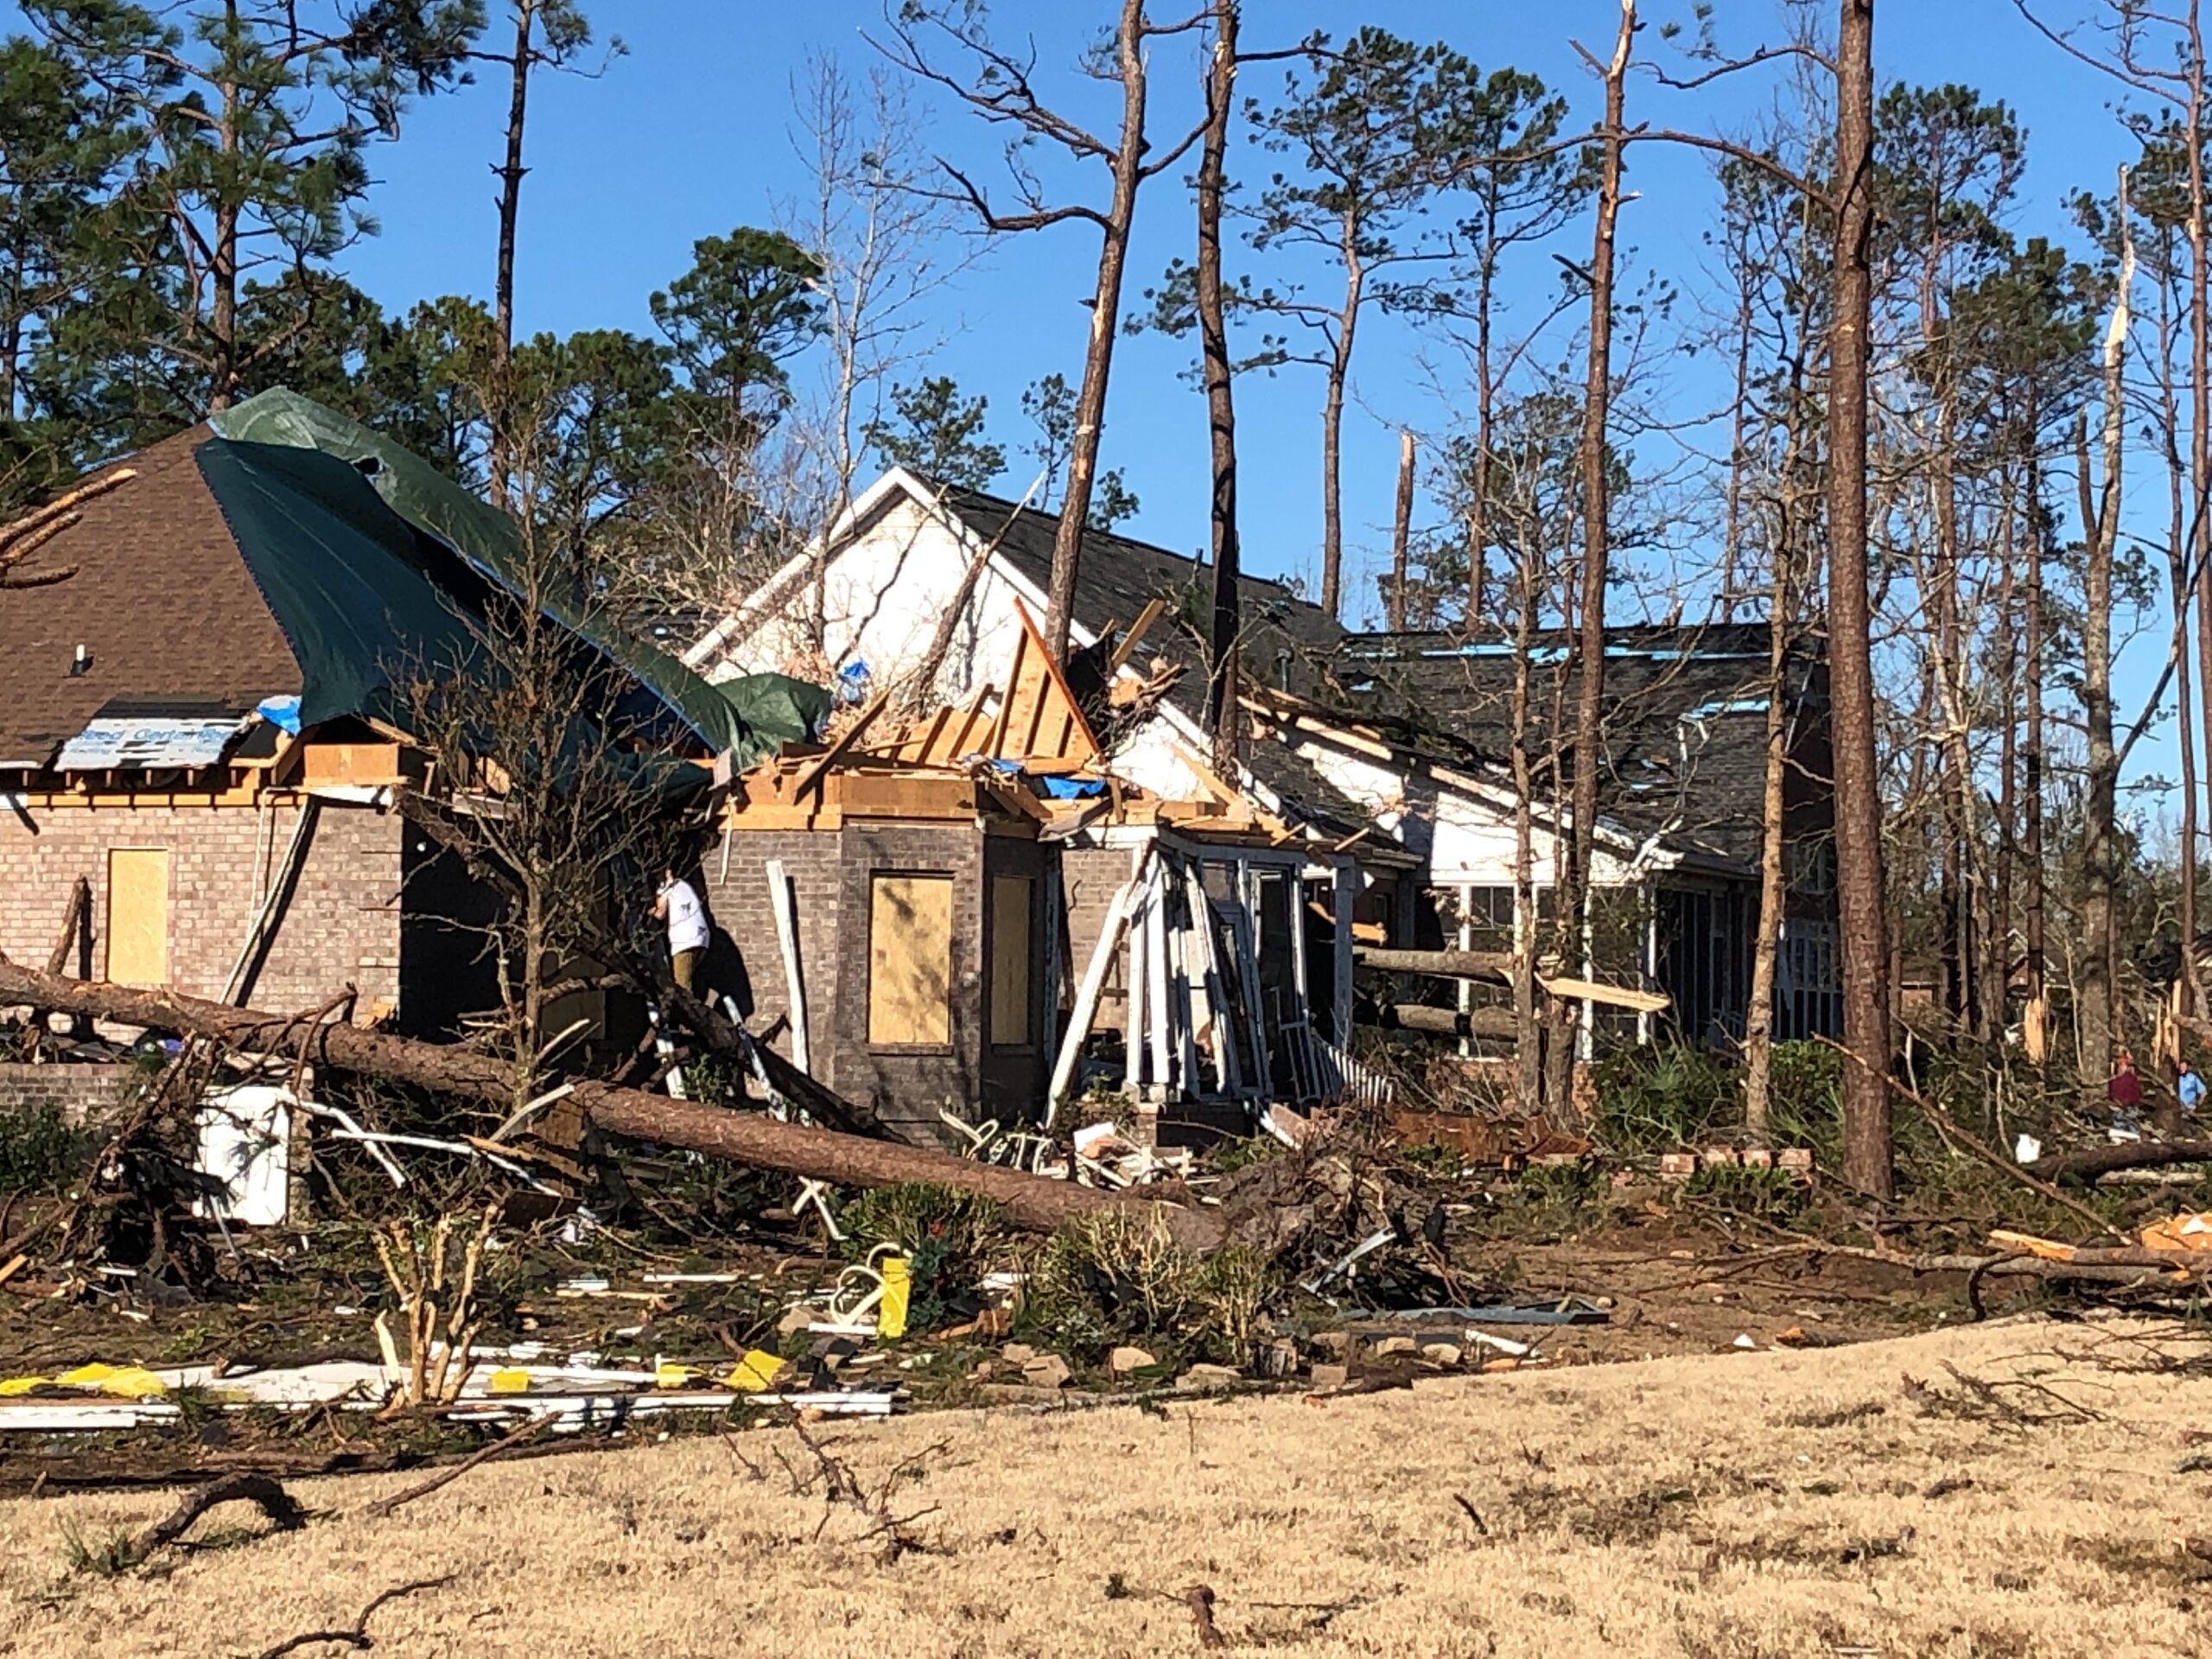 A powerful tornado caused severe damage to homes in the Ocean Ridge Plantation neighborhood in Brunswick County on Feb. 15. Credit: NWS